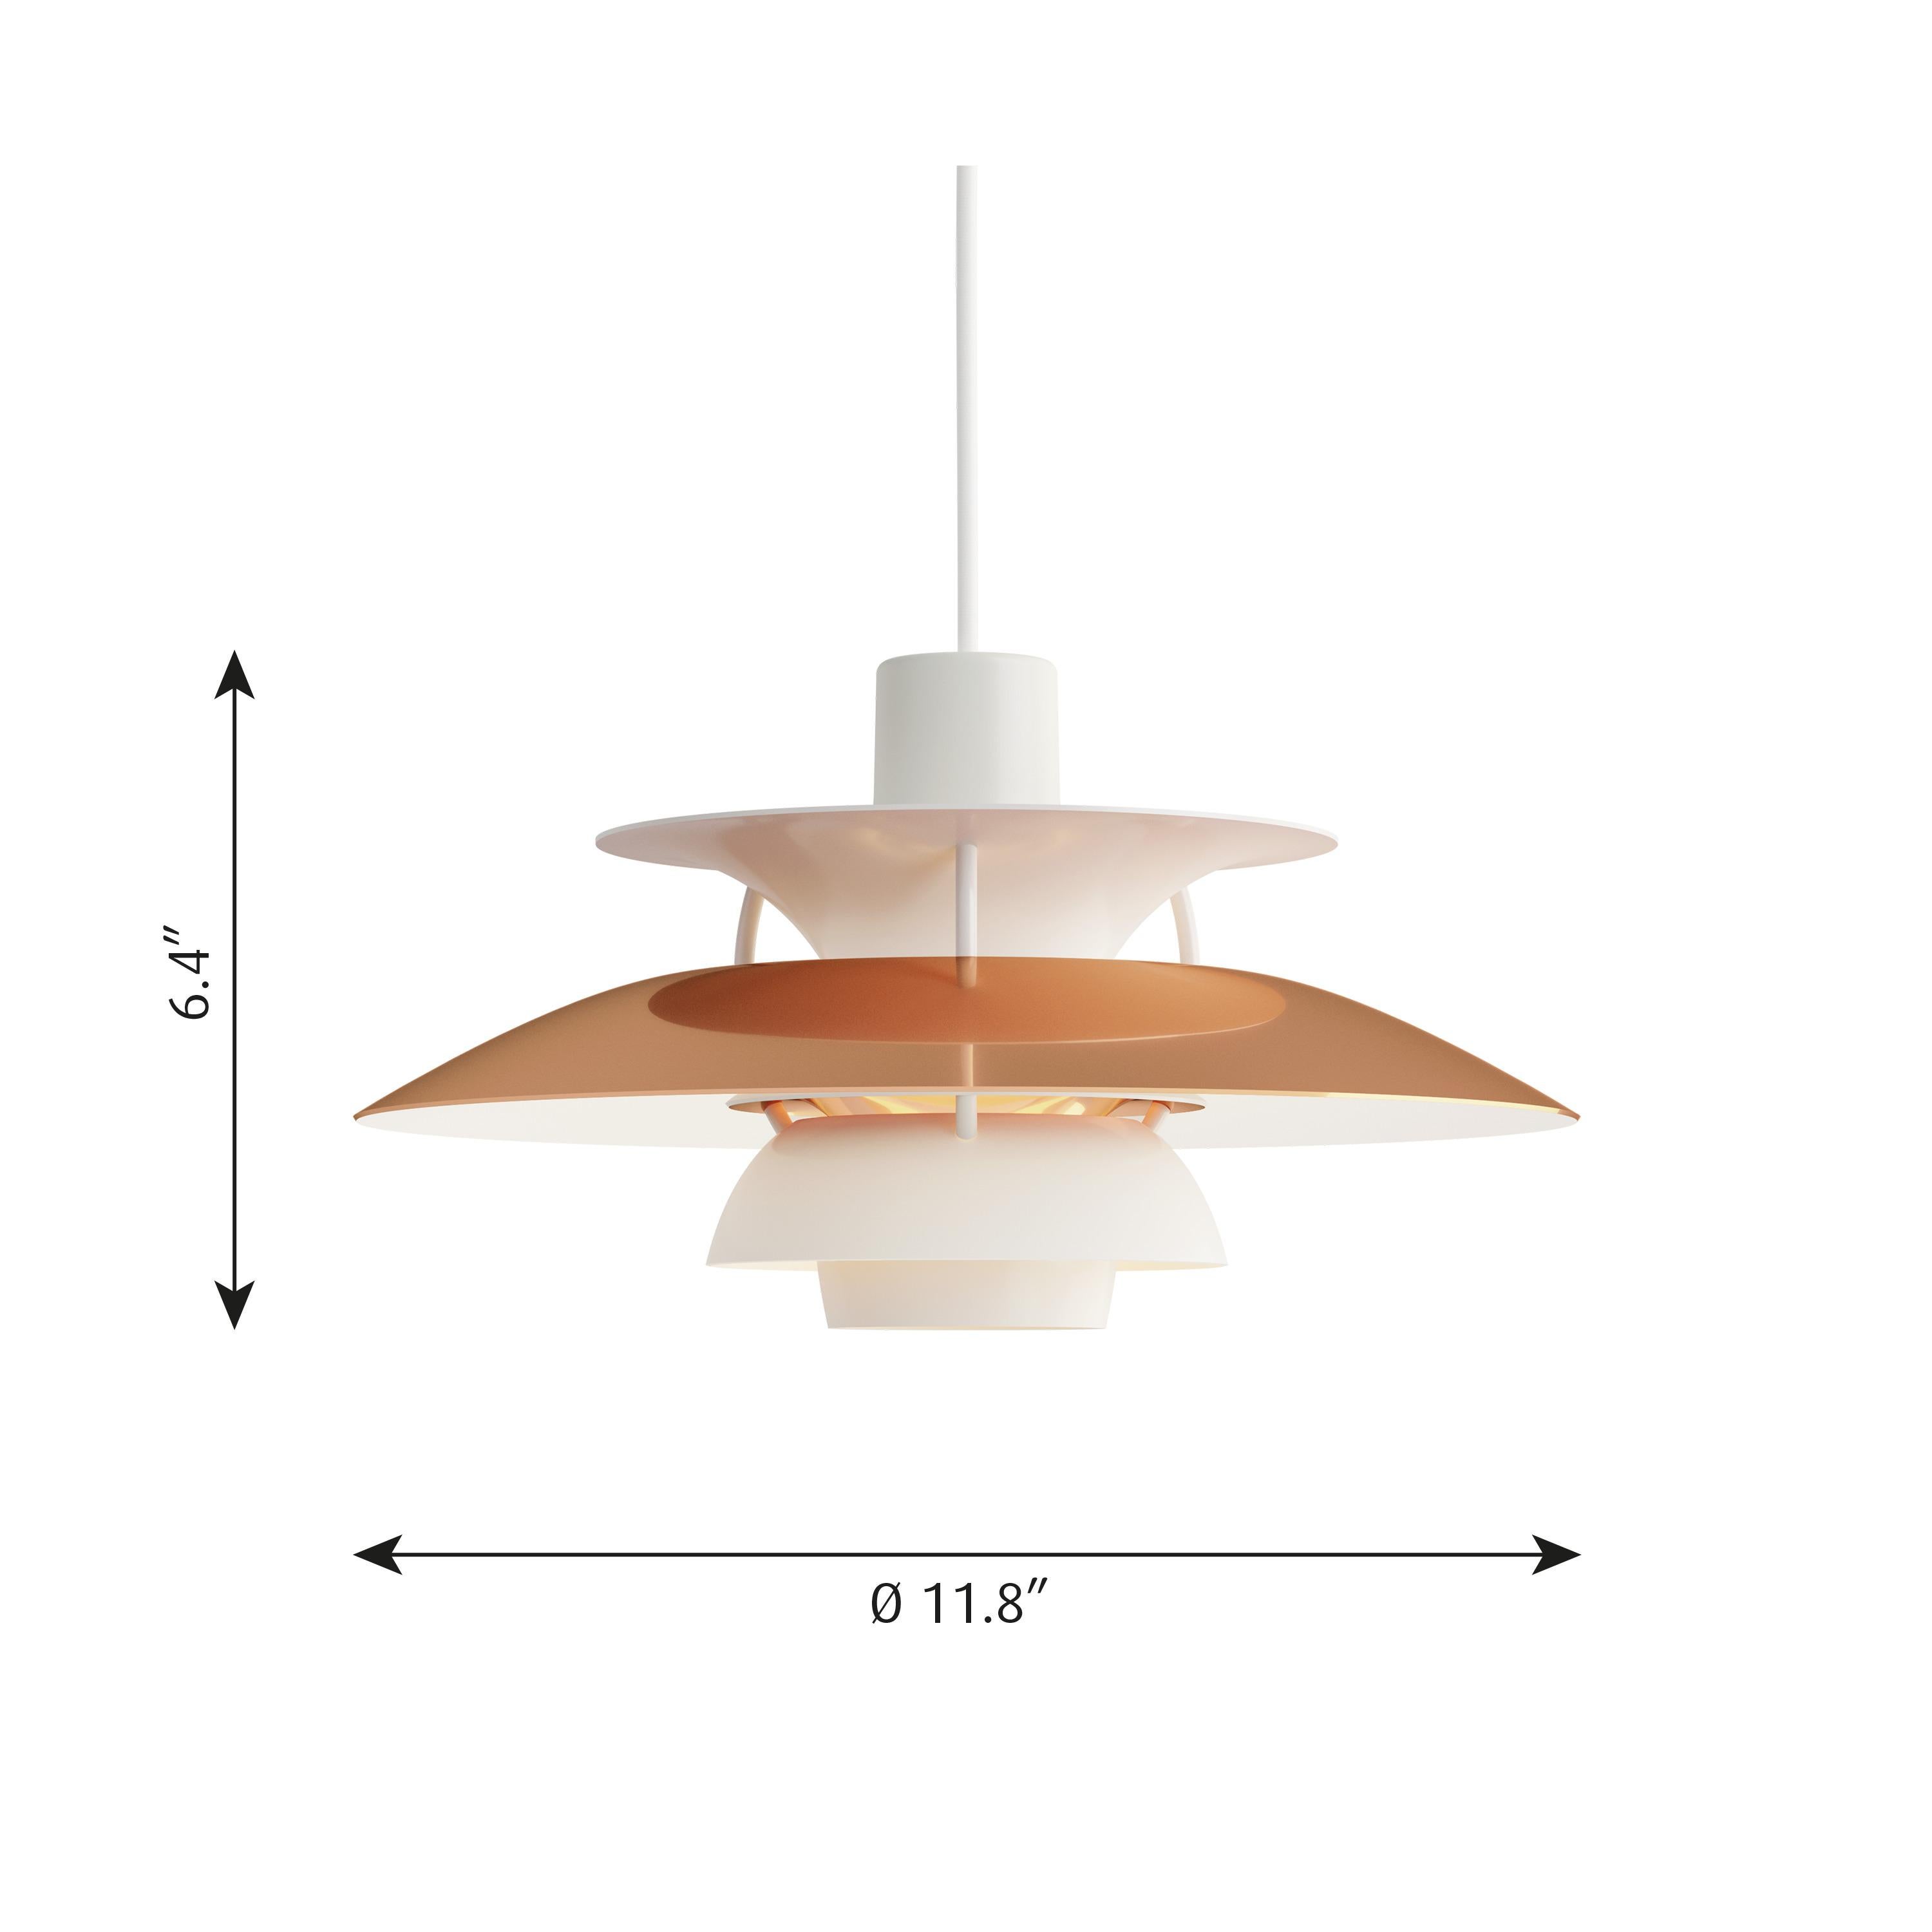 Poul Henningsen PH5 mini copper pendant for Louis Poulsen. Poul Henningsen introduced his iconic PH 5 pendant light in 1958. To celebrate, Louis Poulsen is putting out this special 60th Anniversary edition PH 5 mini and Classic in copper. No one